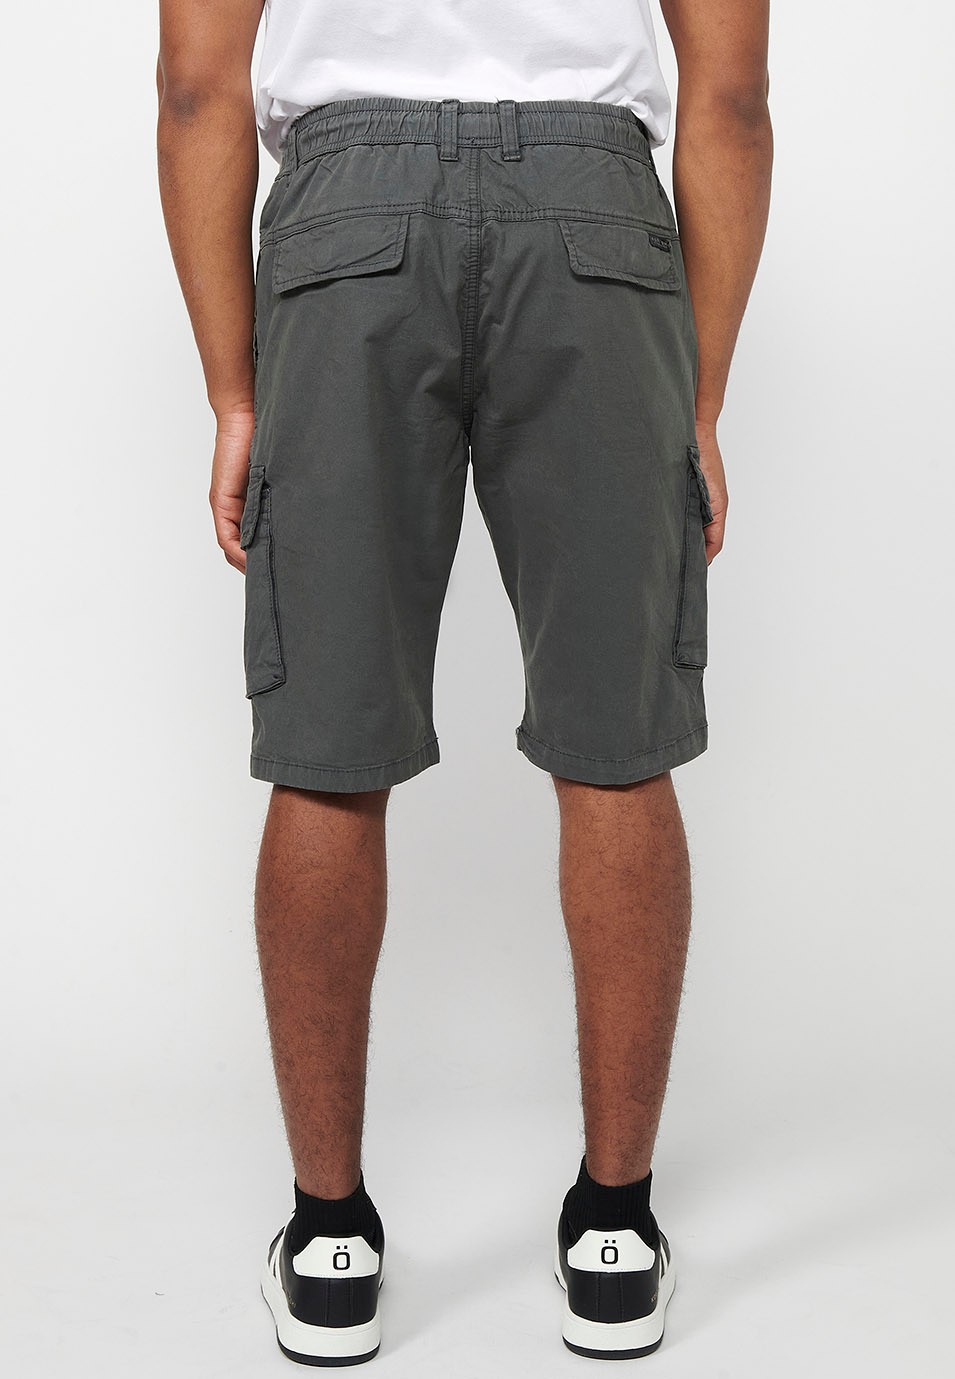 Cargo shorts with side pockets with flap and front closure with zipper and button Color Gray for Men 4